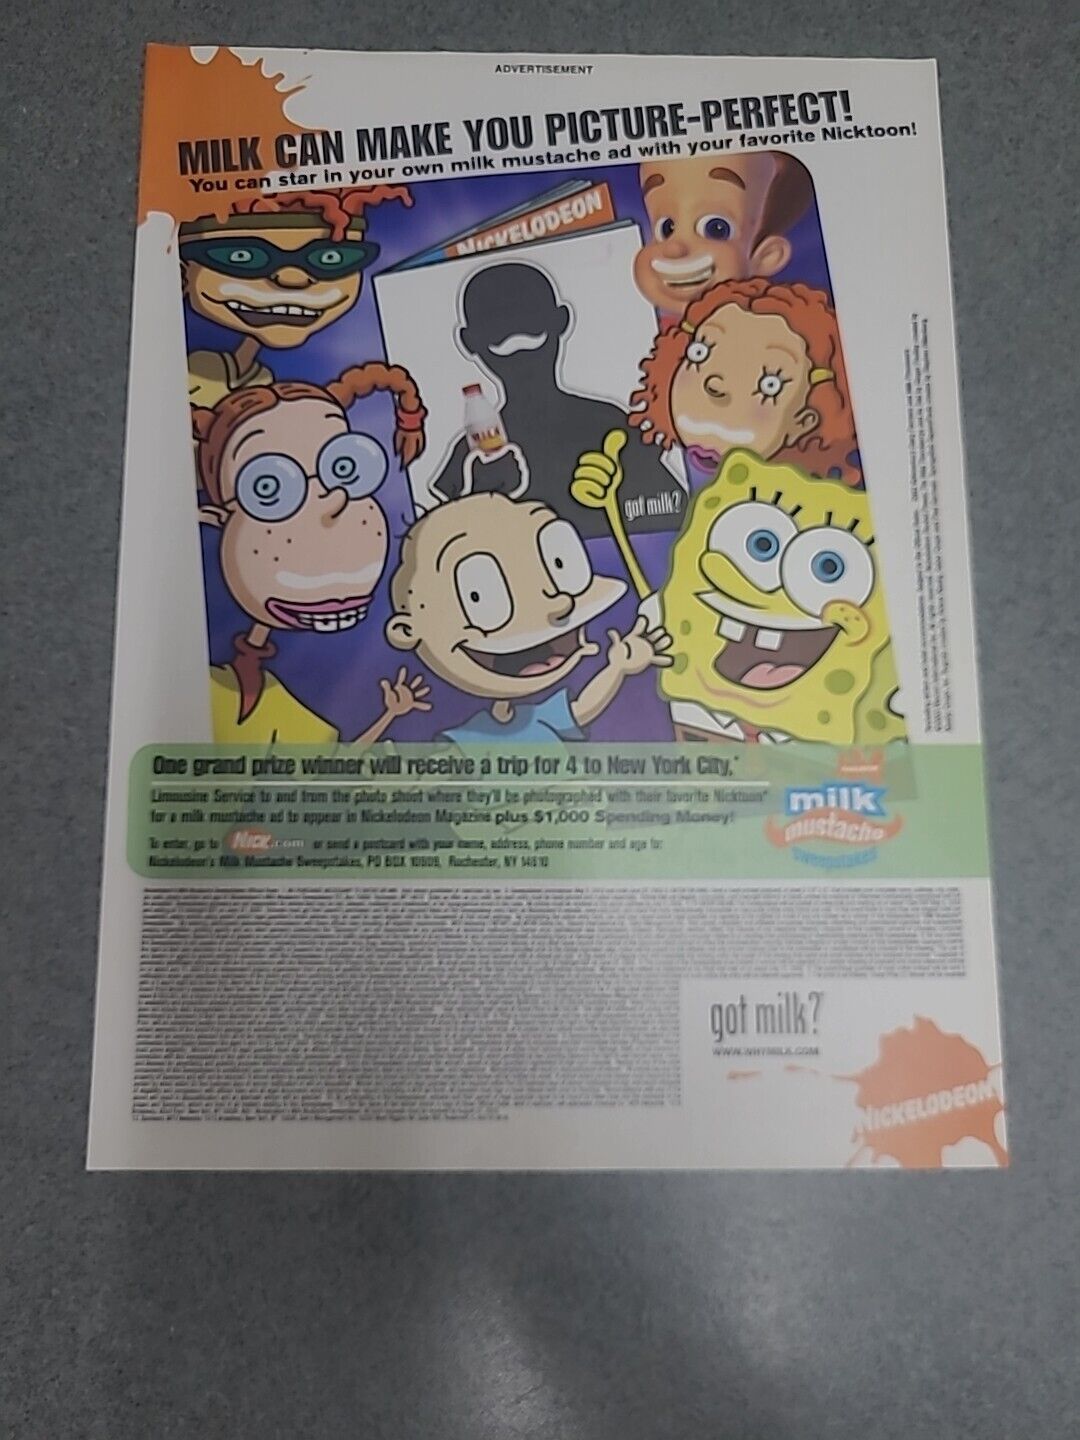 Nickelodeon Milk Mustache Sweepstakes Print Ad 2003 8x11  Great To Frame 